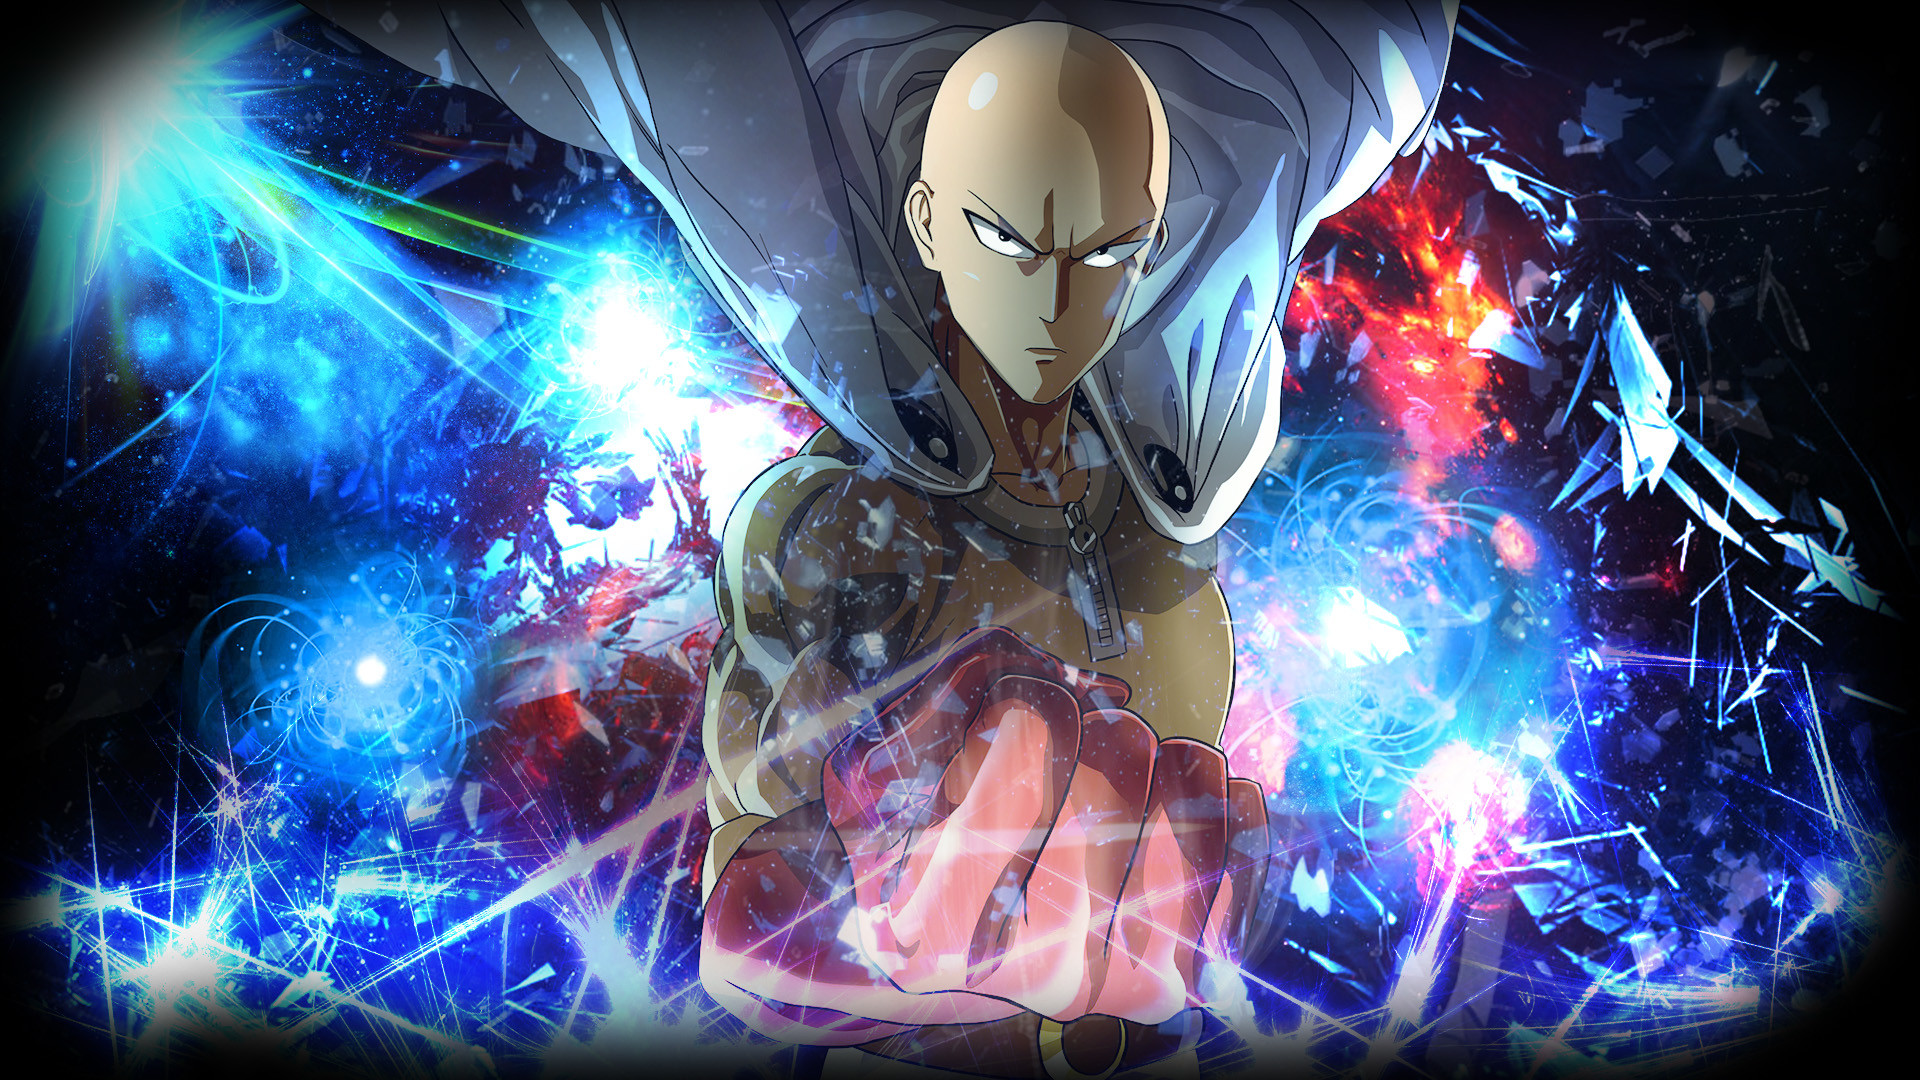 8. "Saitama" from One Punch Man - wide 4